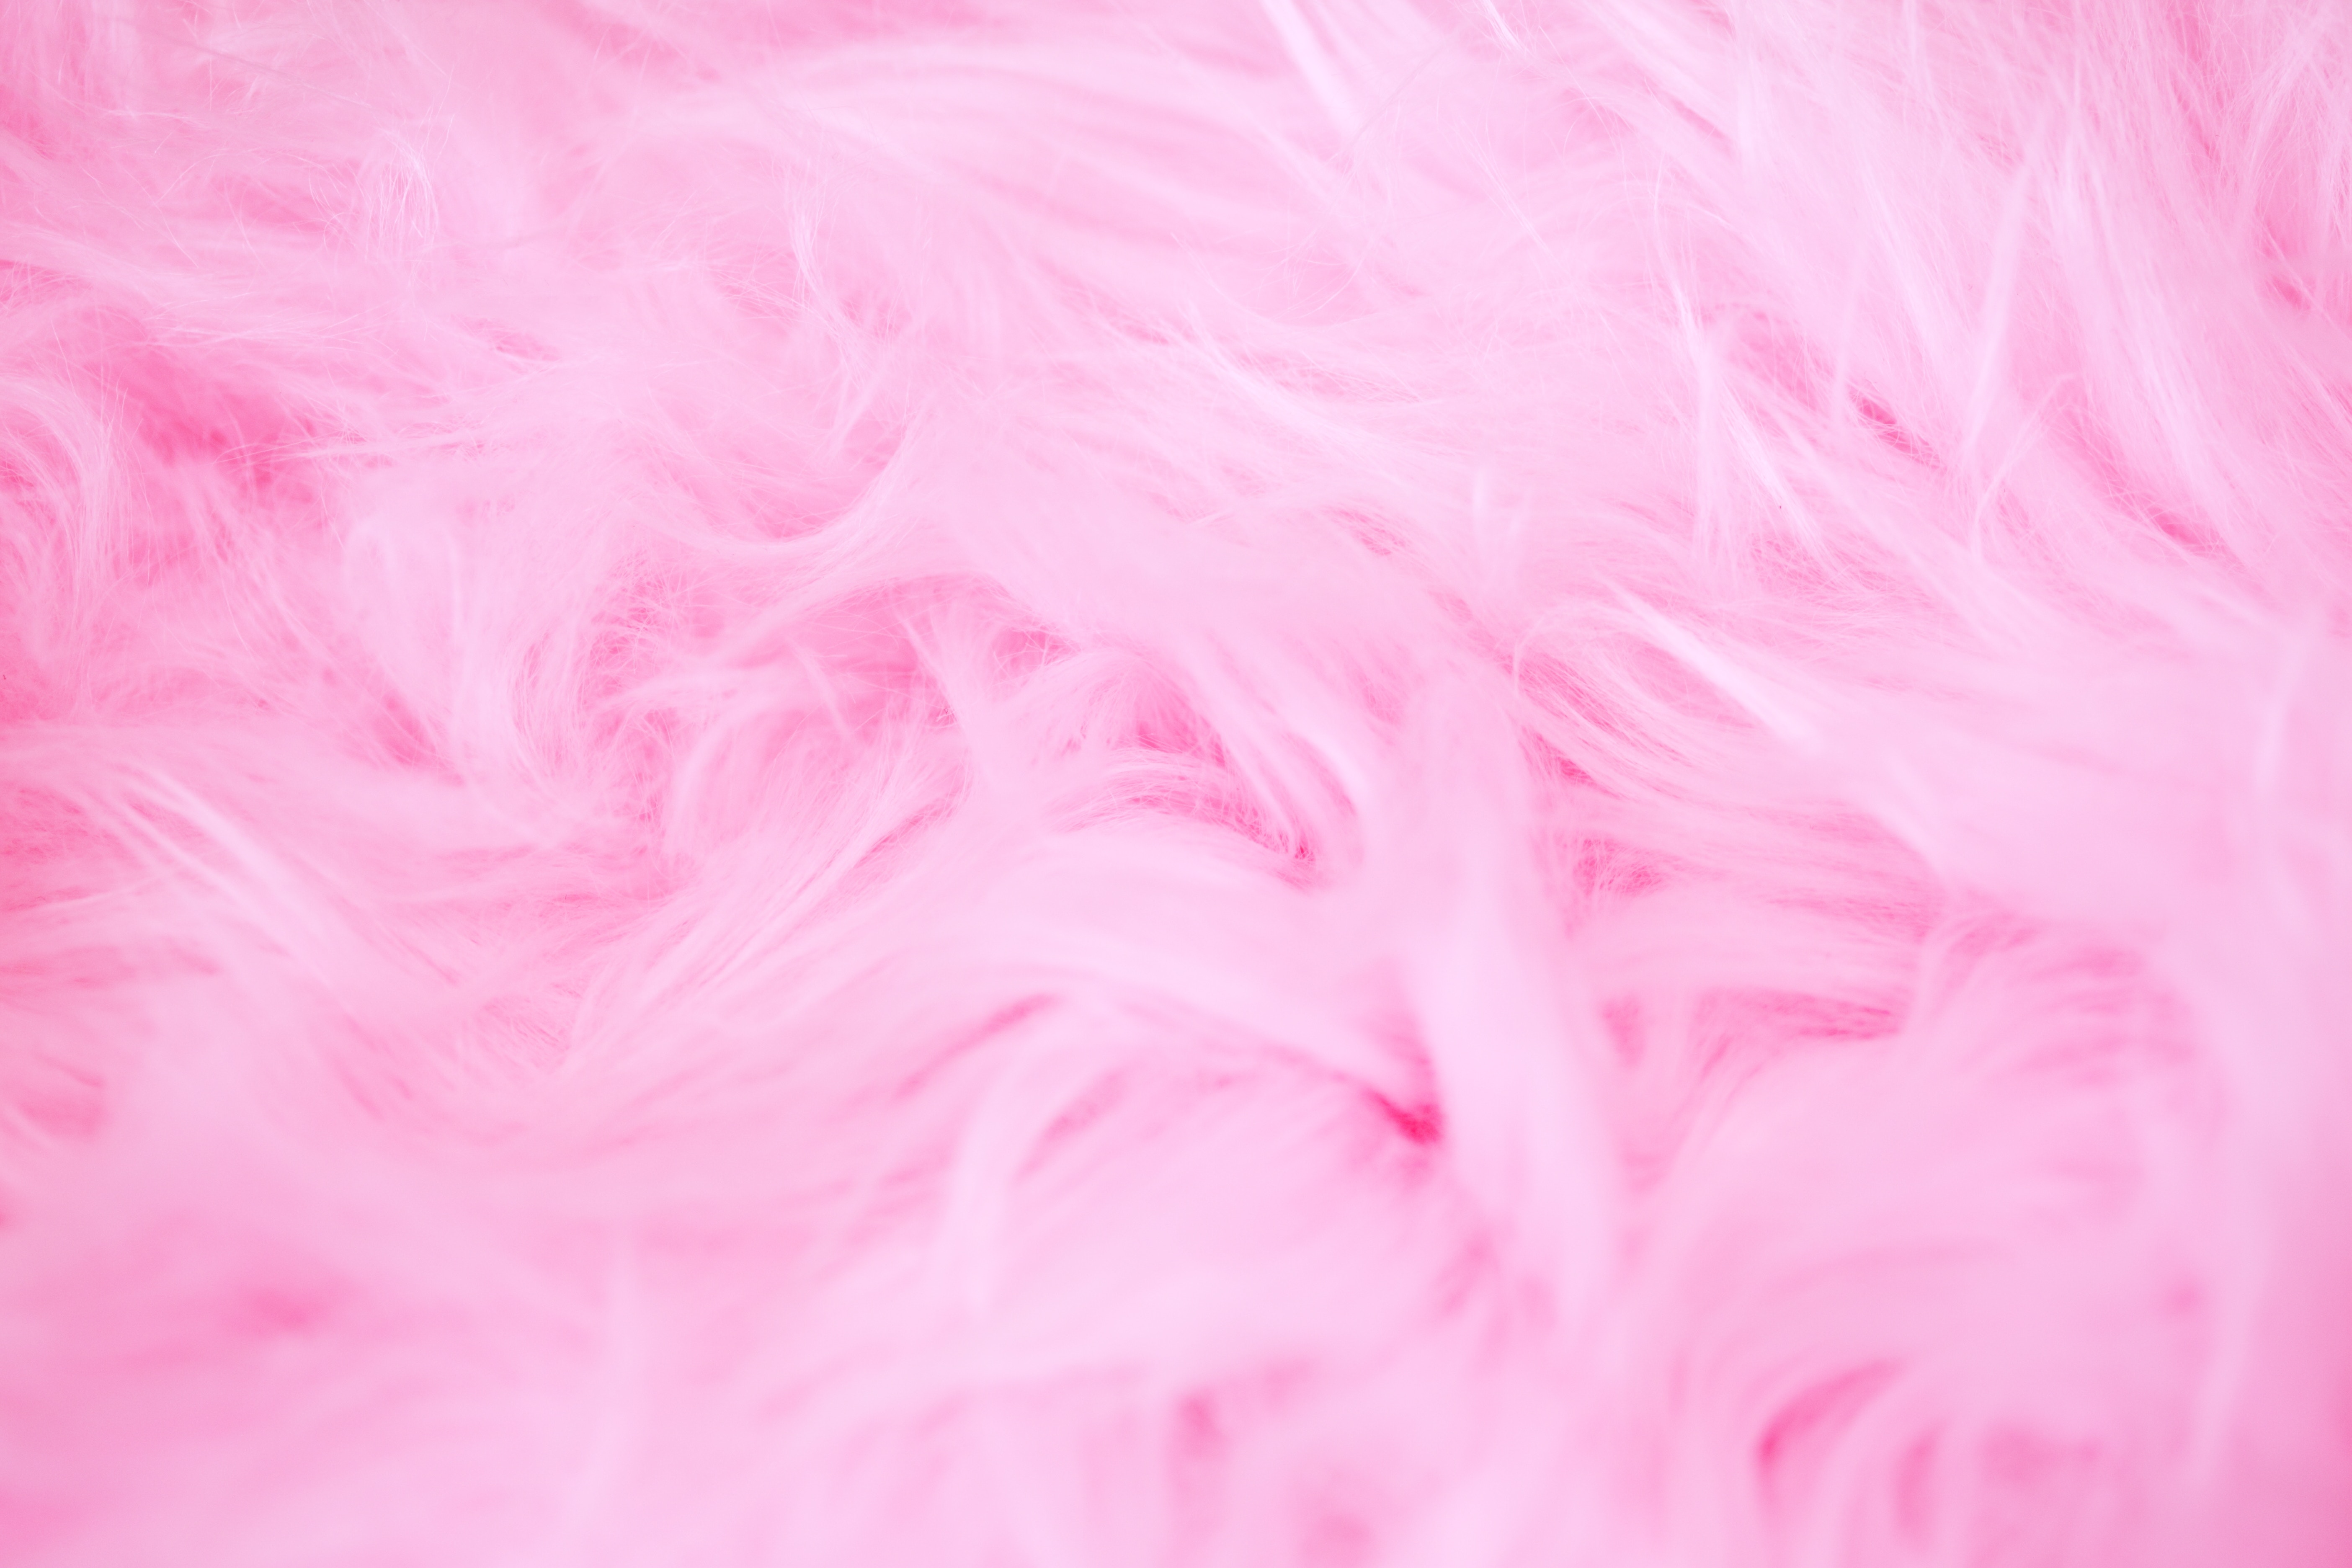 Fluffy Wallpapers